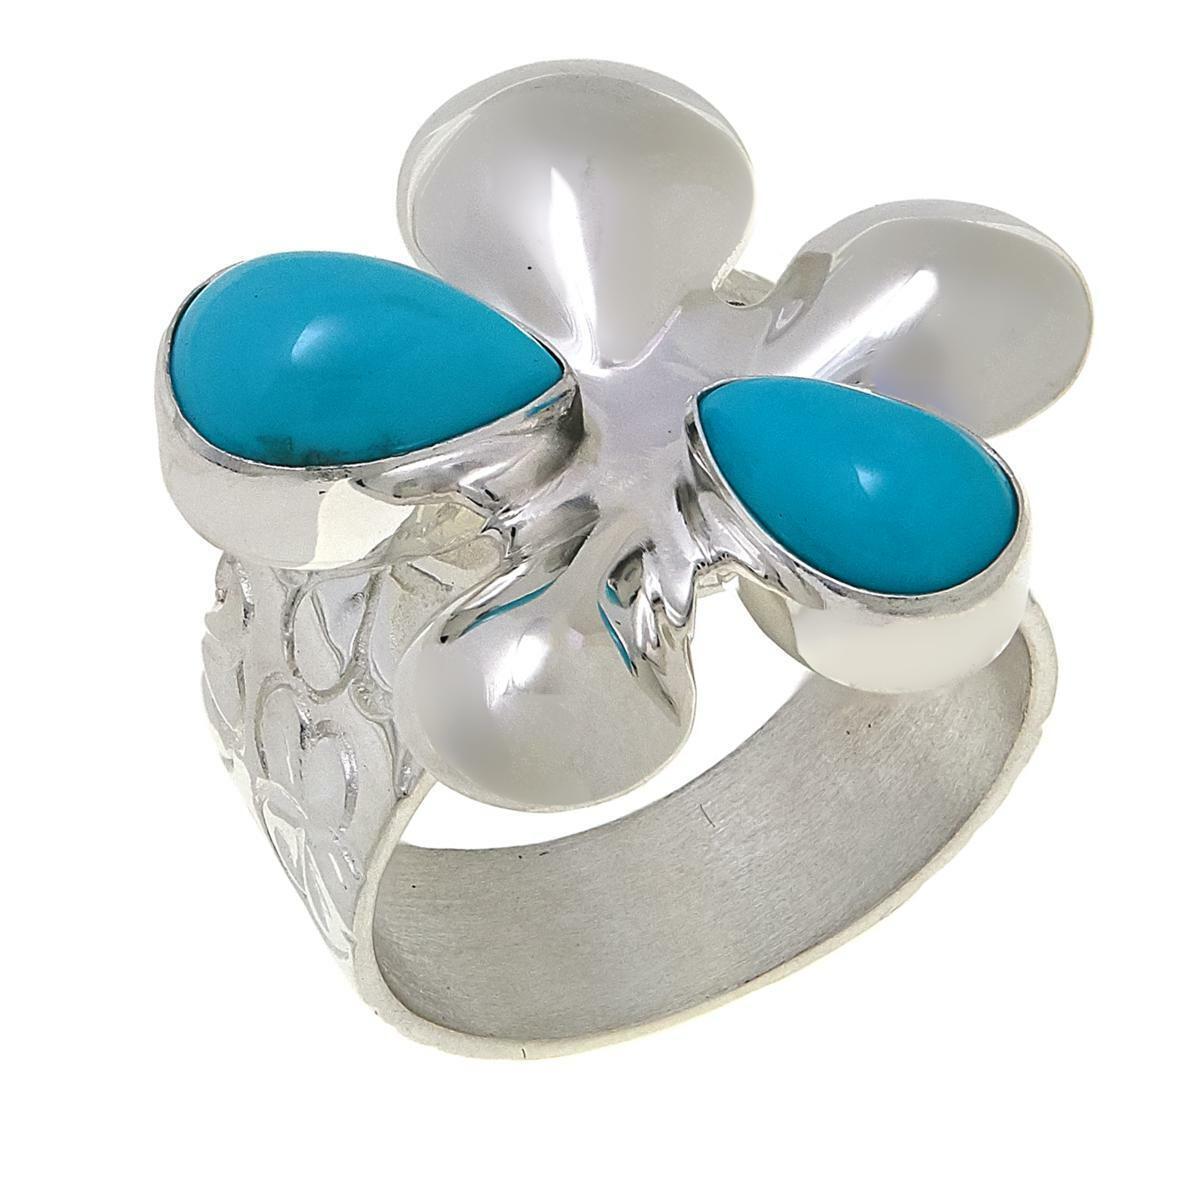 Jay King Campitos Turquoise Sterling Silver Flower-Desing Ring Size 5 HSN $65.00